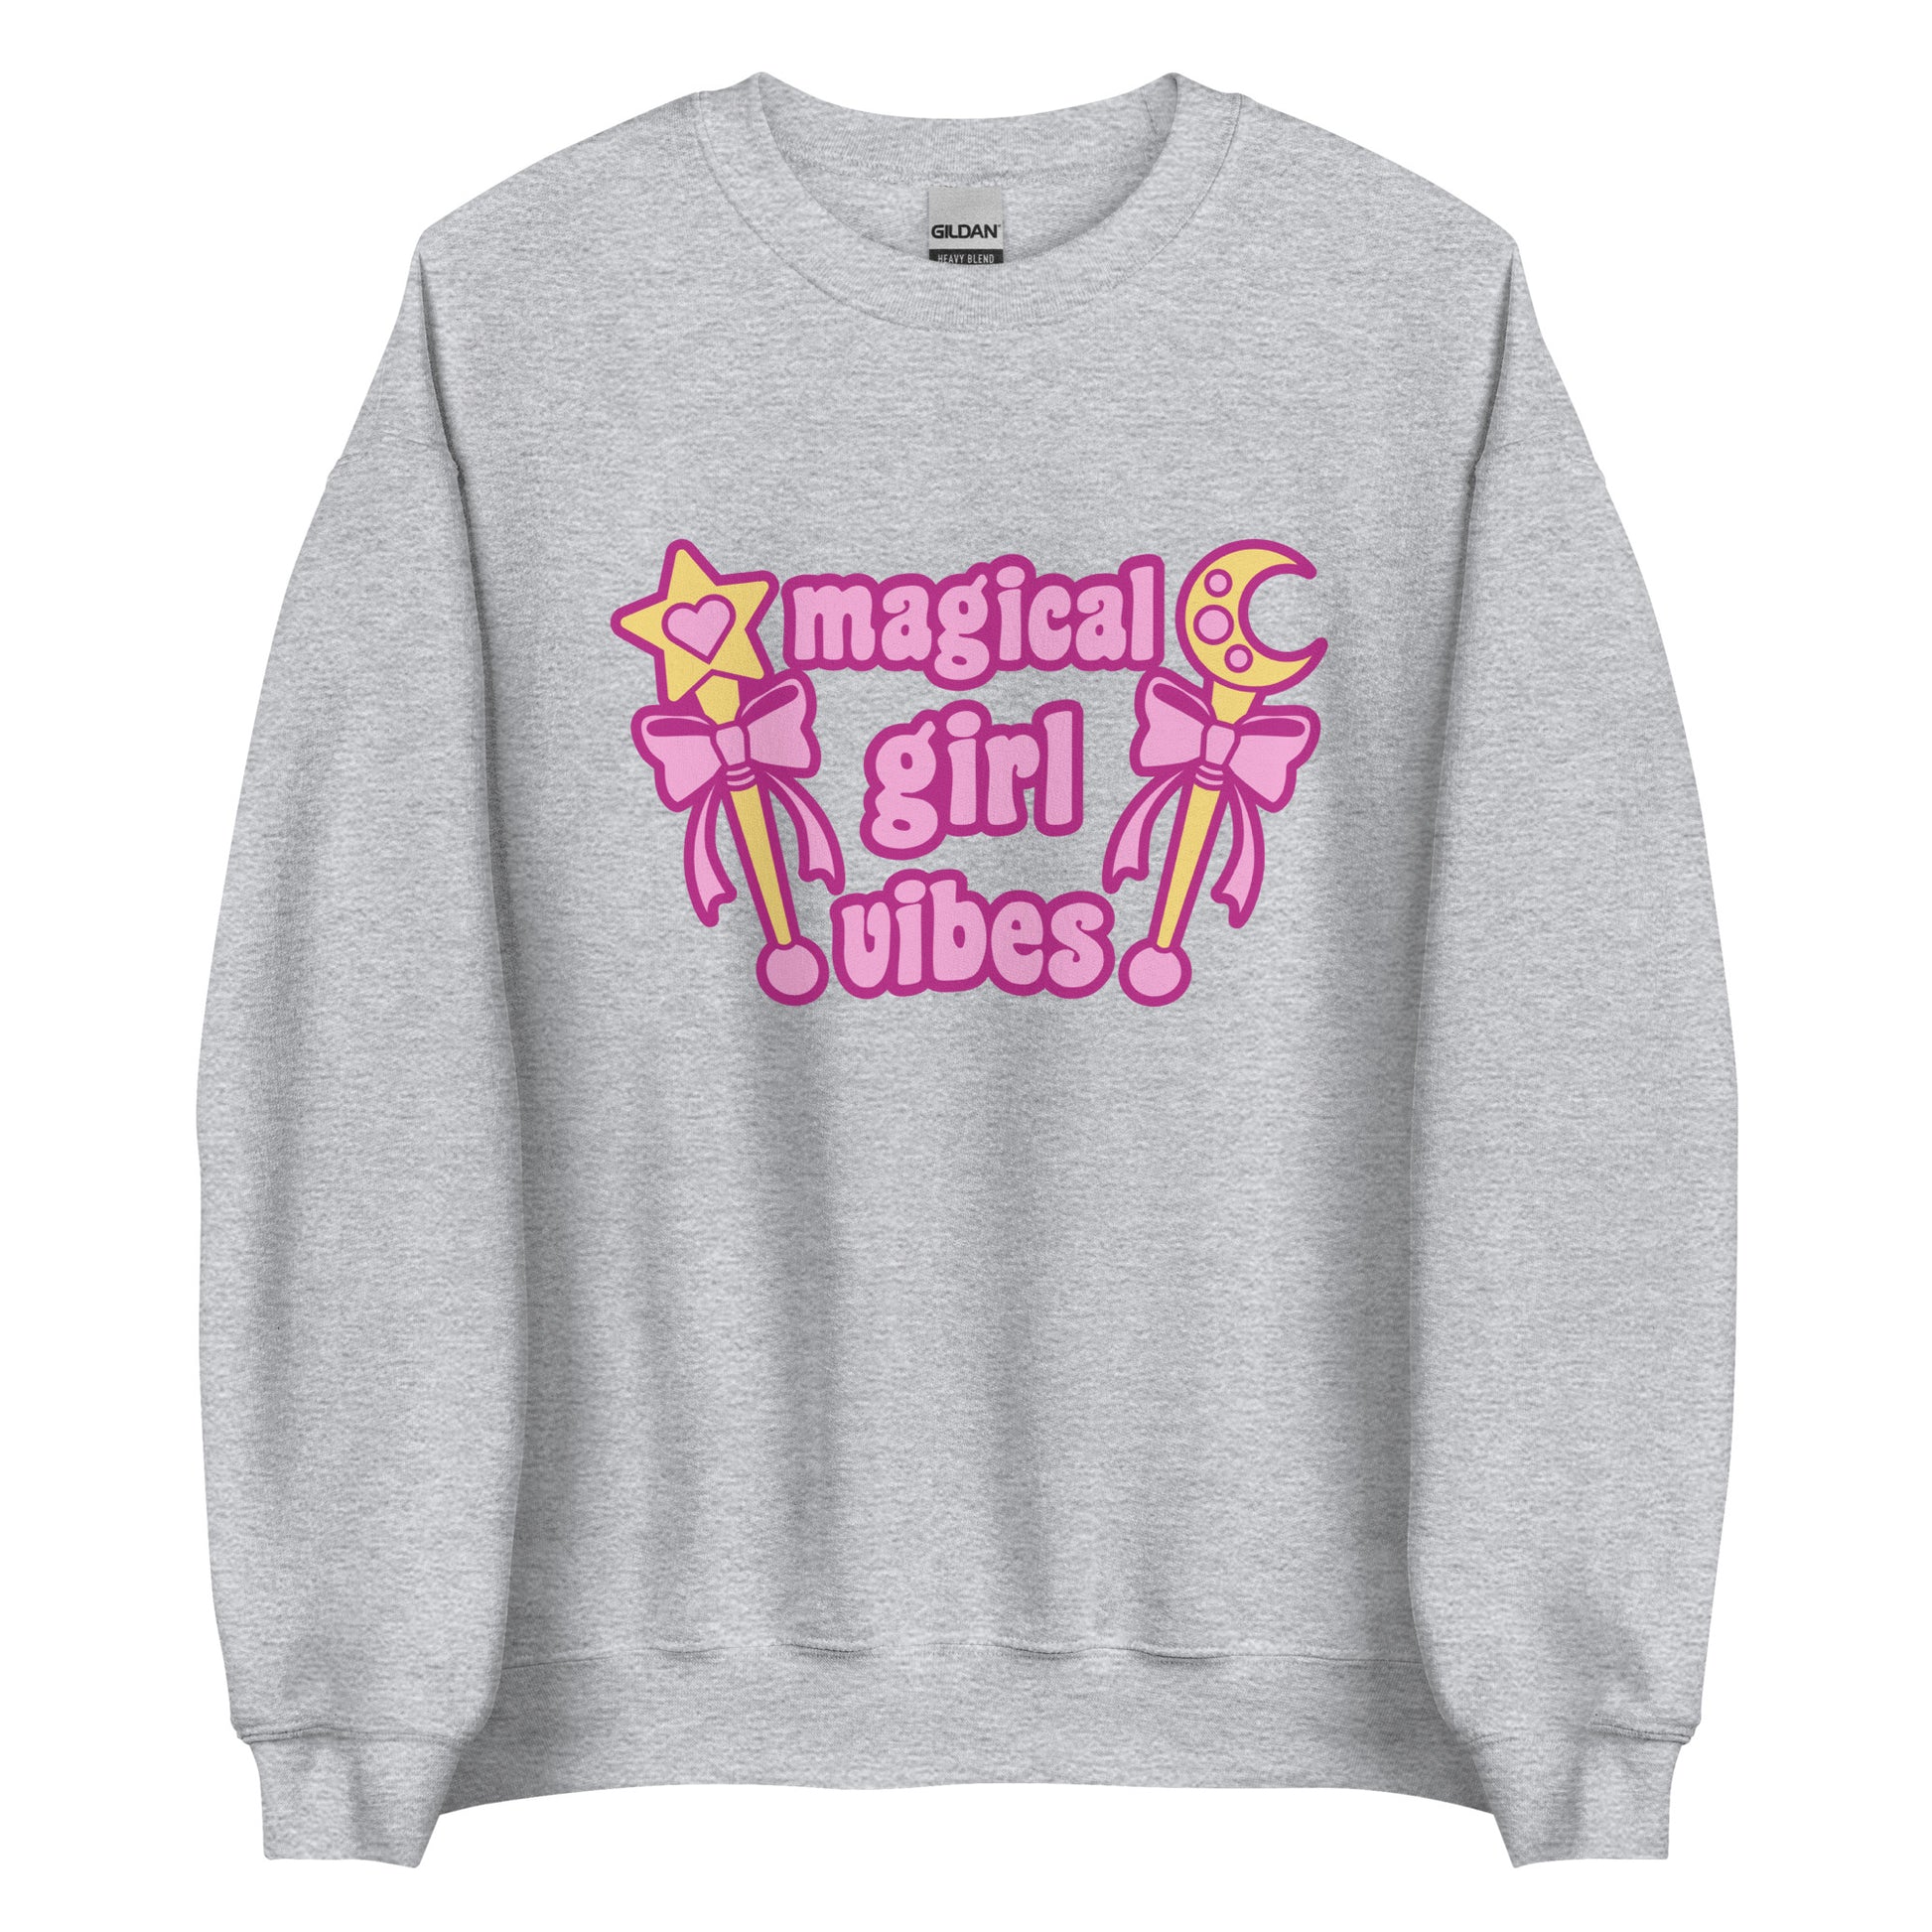 A heathered grey crewneck sweatshirt featuring two gold wands with pink bows and pink text reading "Magical girl vibes"